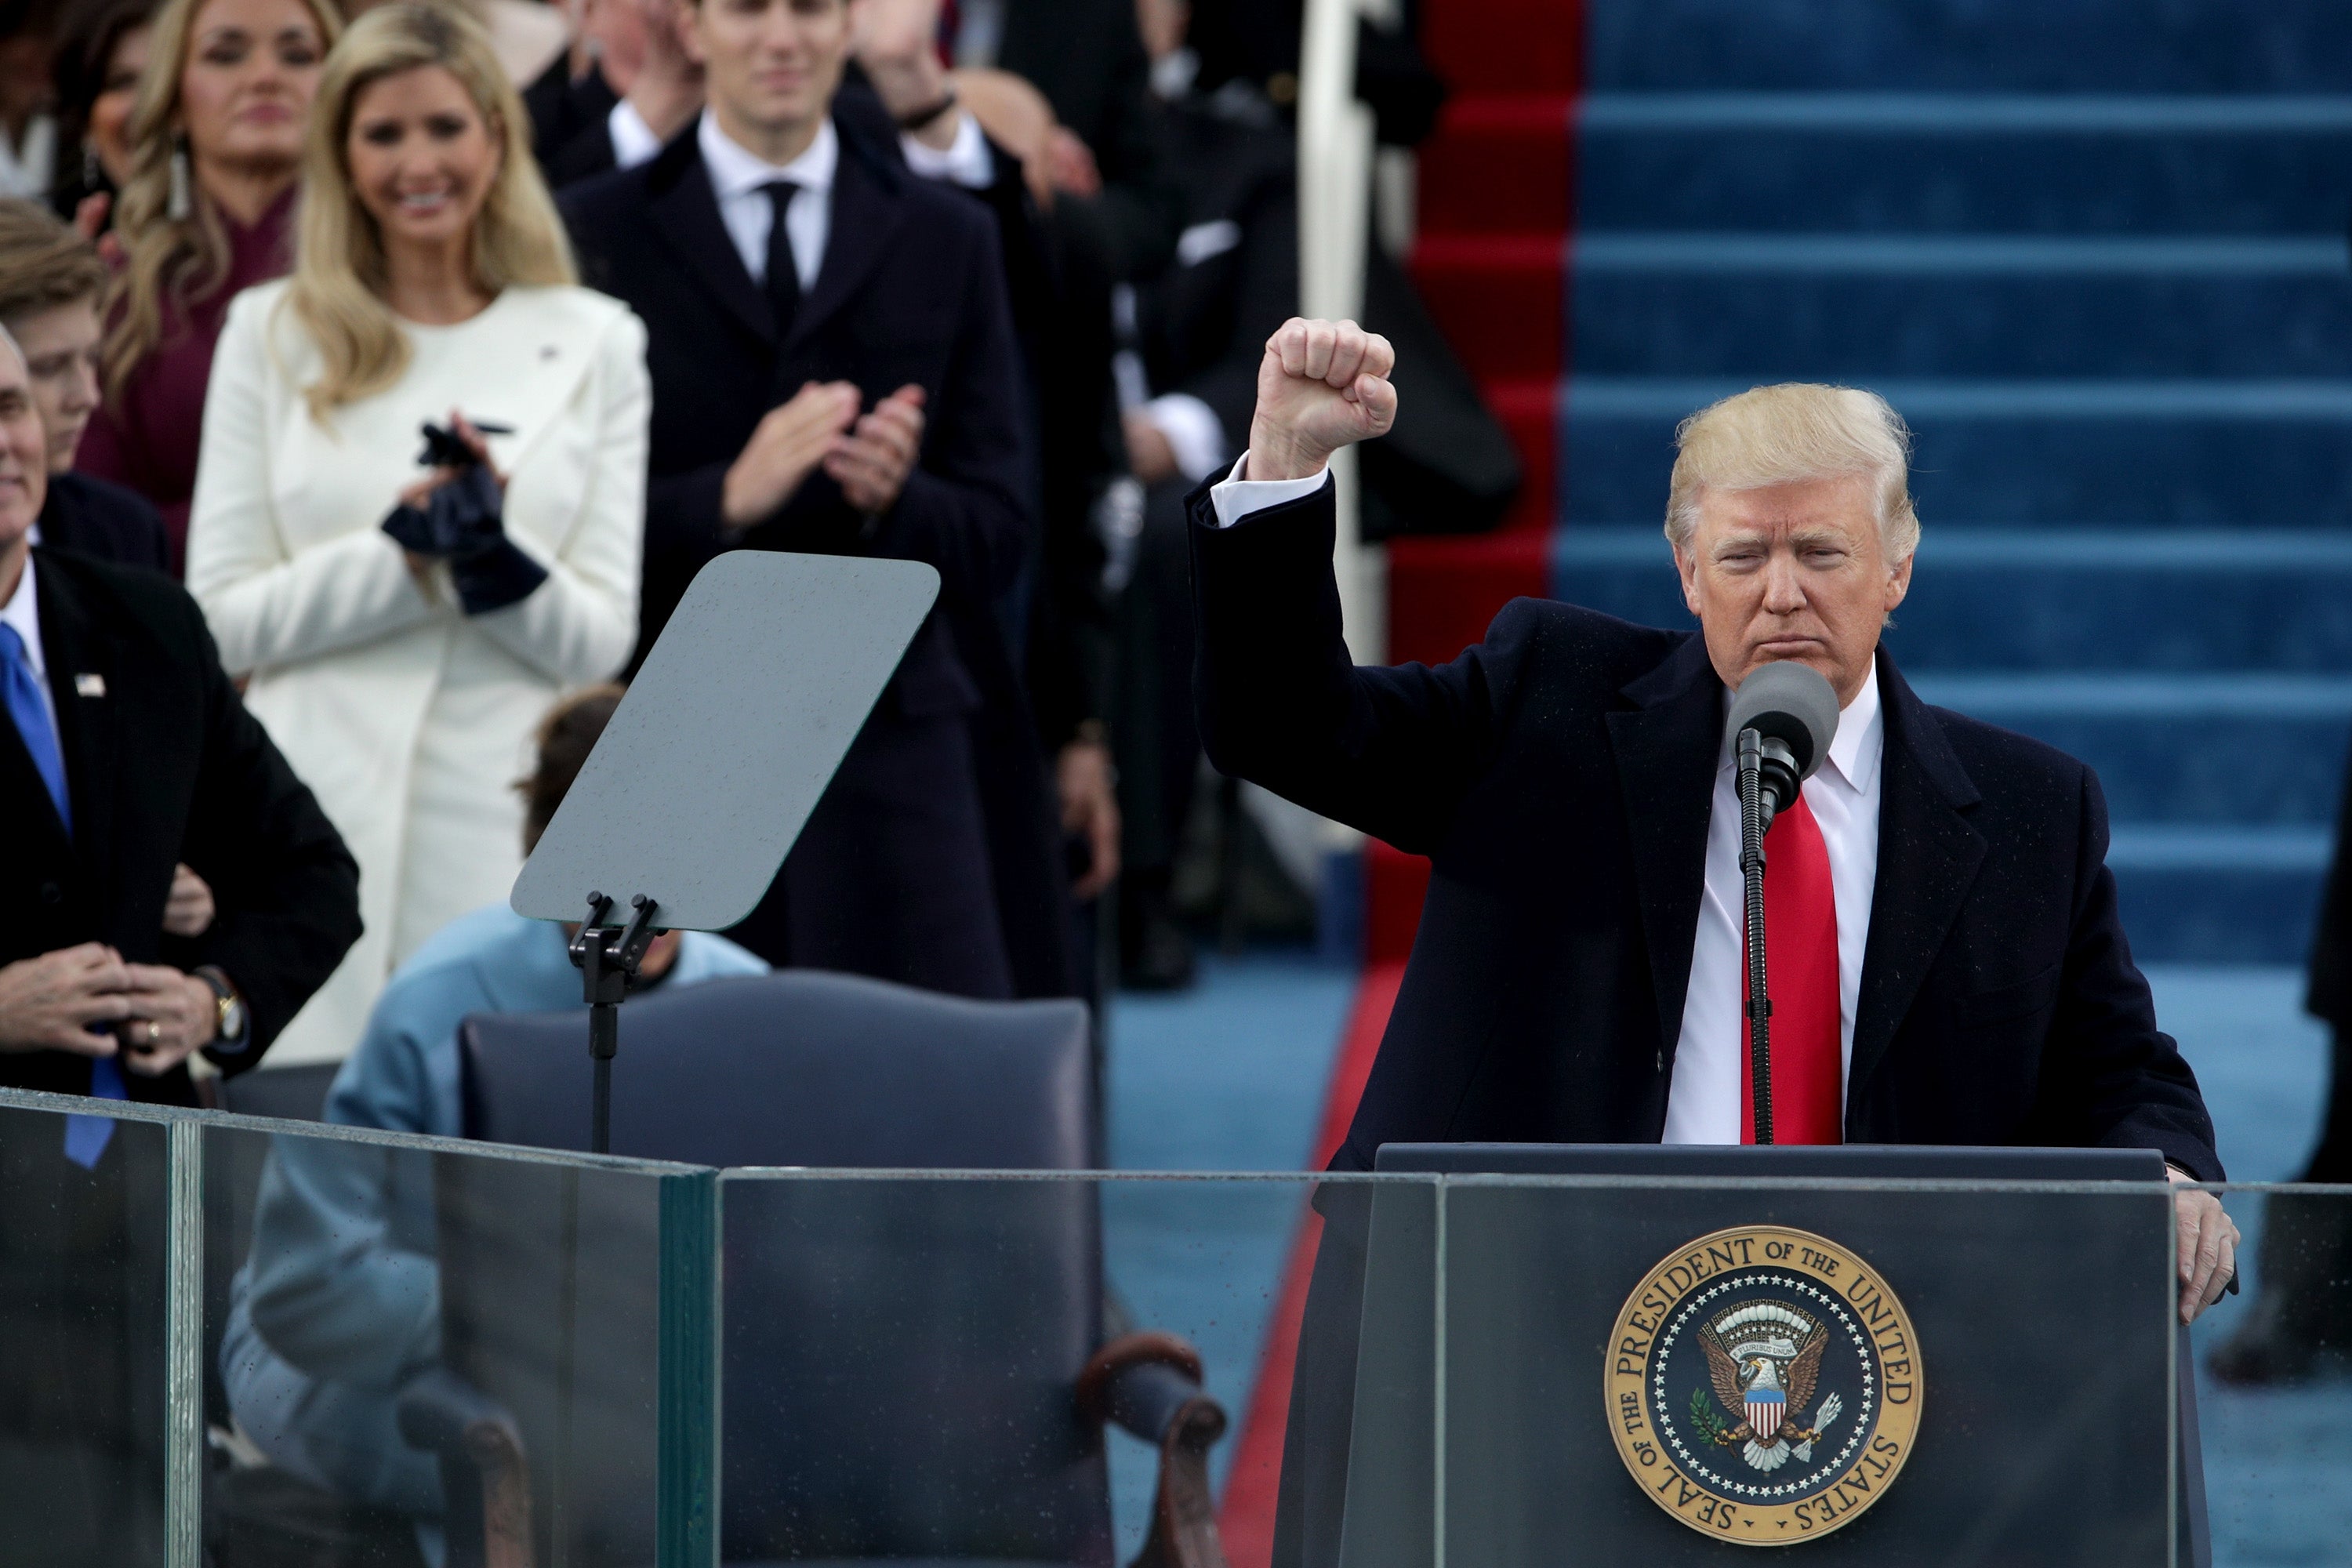 Trump raises a fist after his inauguration on 20 January 2017